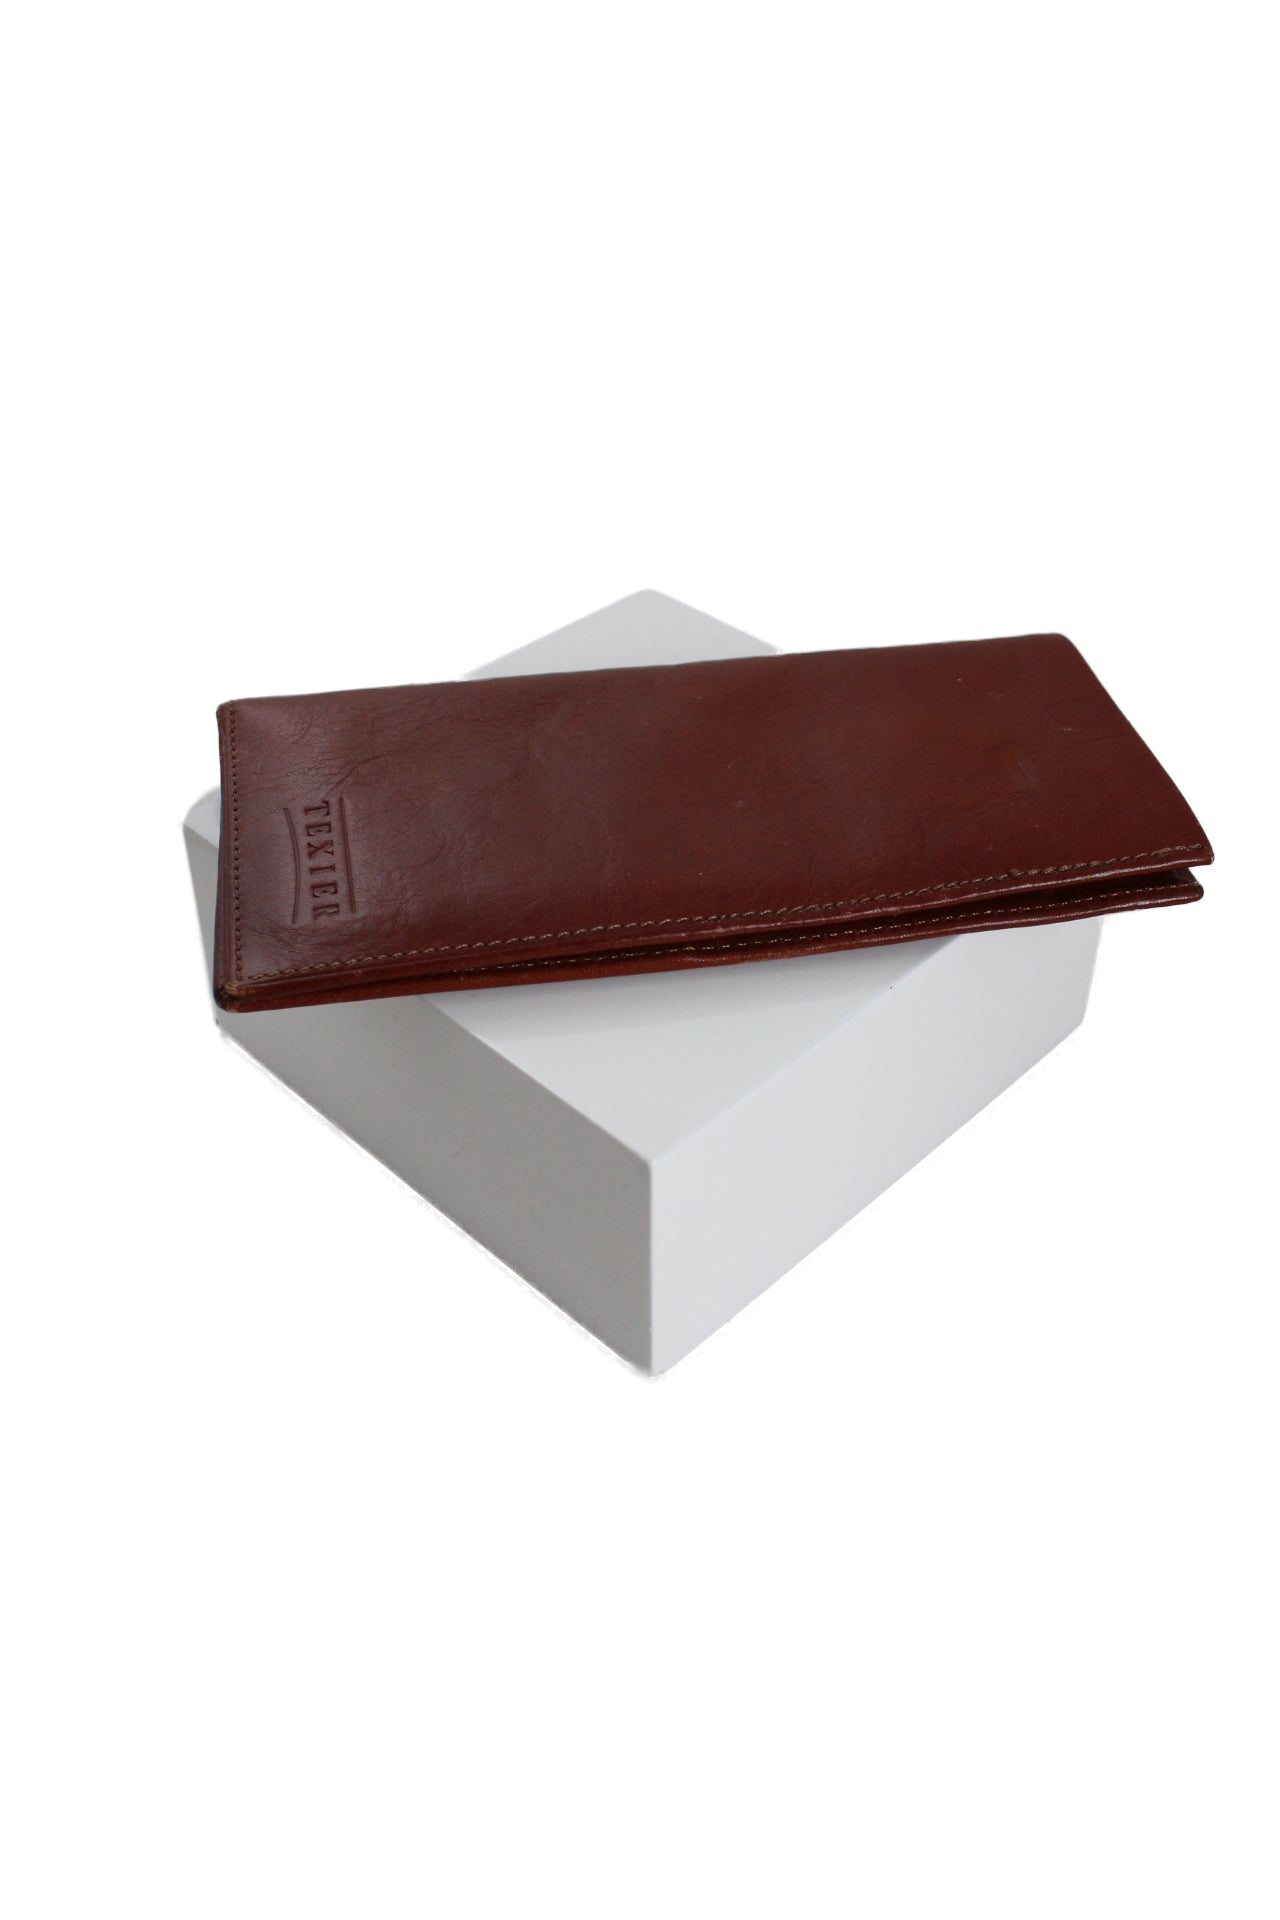 upper angle of texier brown leather bill fold. features many card holder slots, two larger slit pockets, and debossed branding on bottom right. 